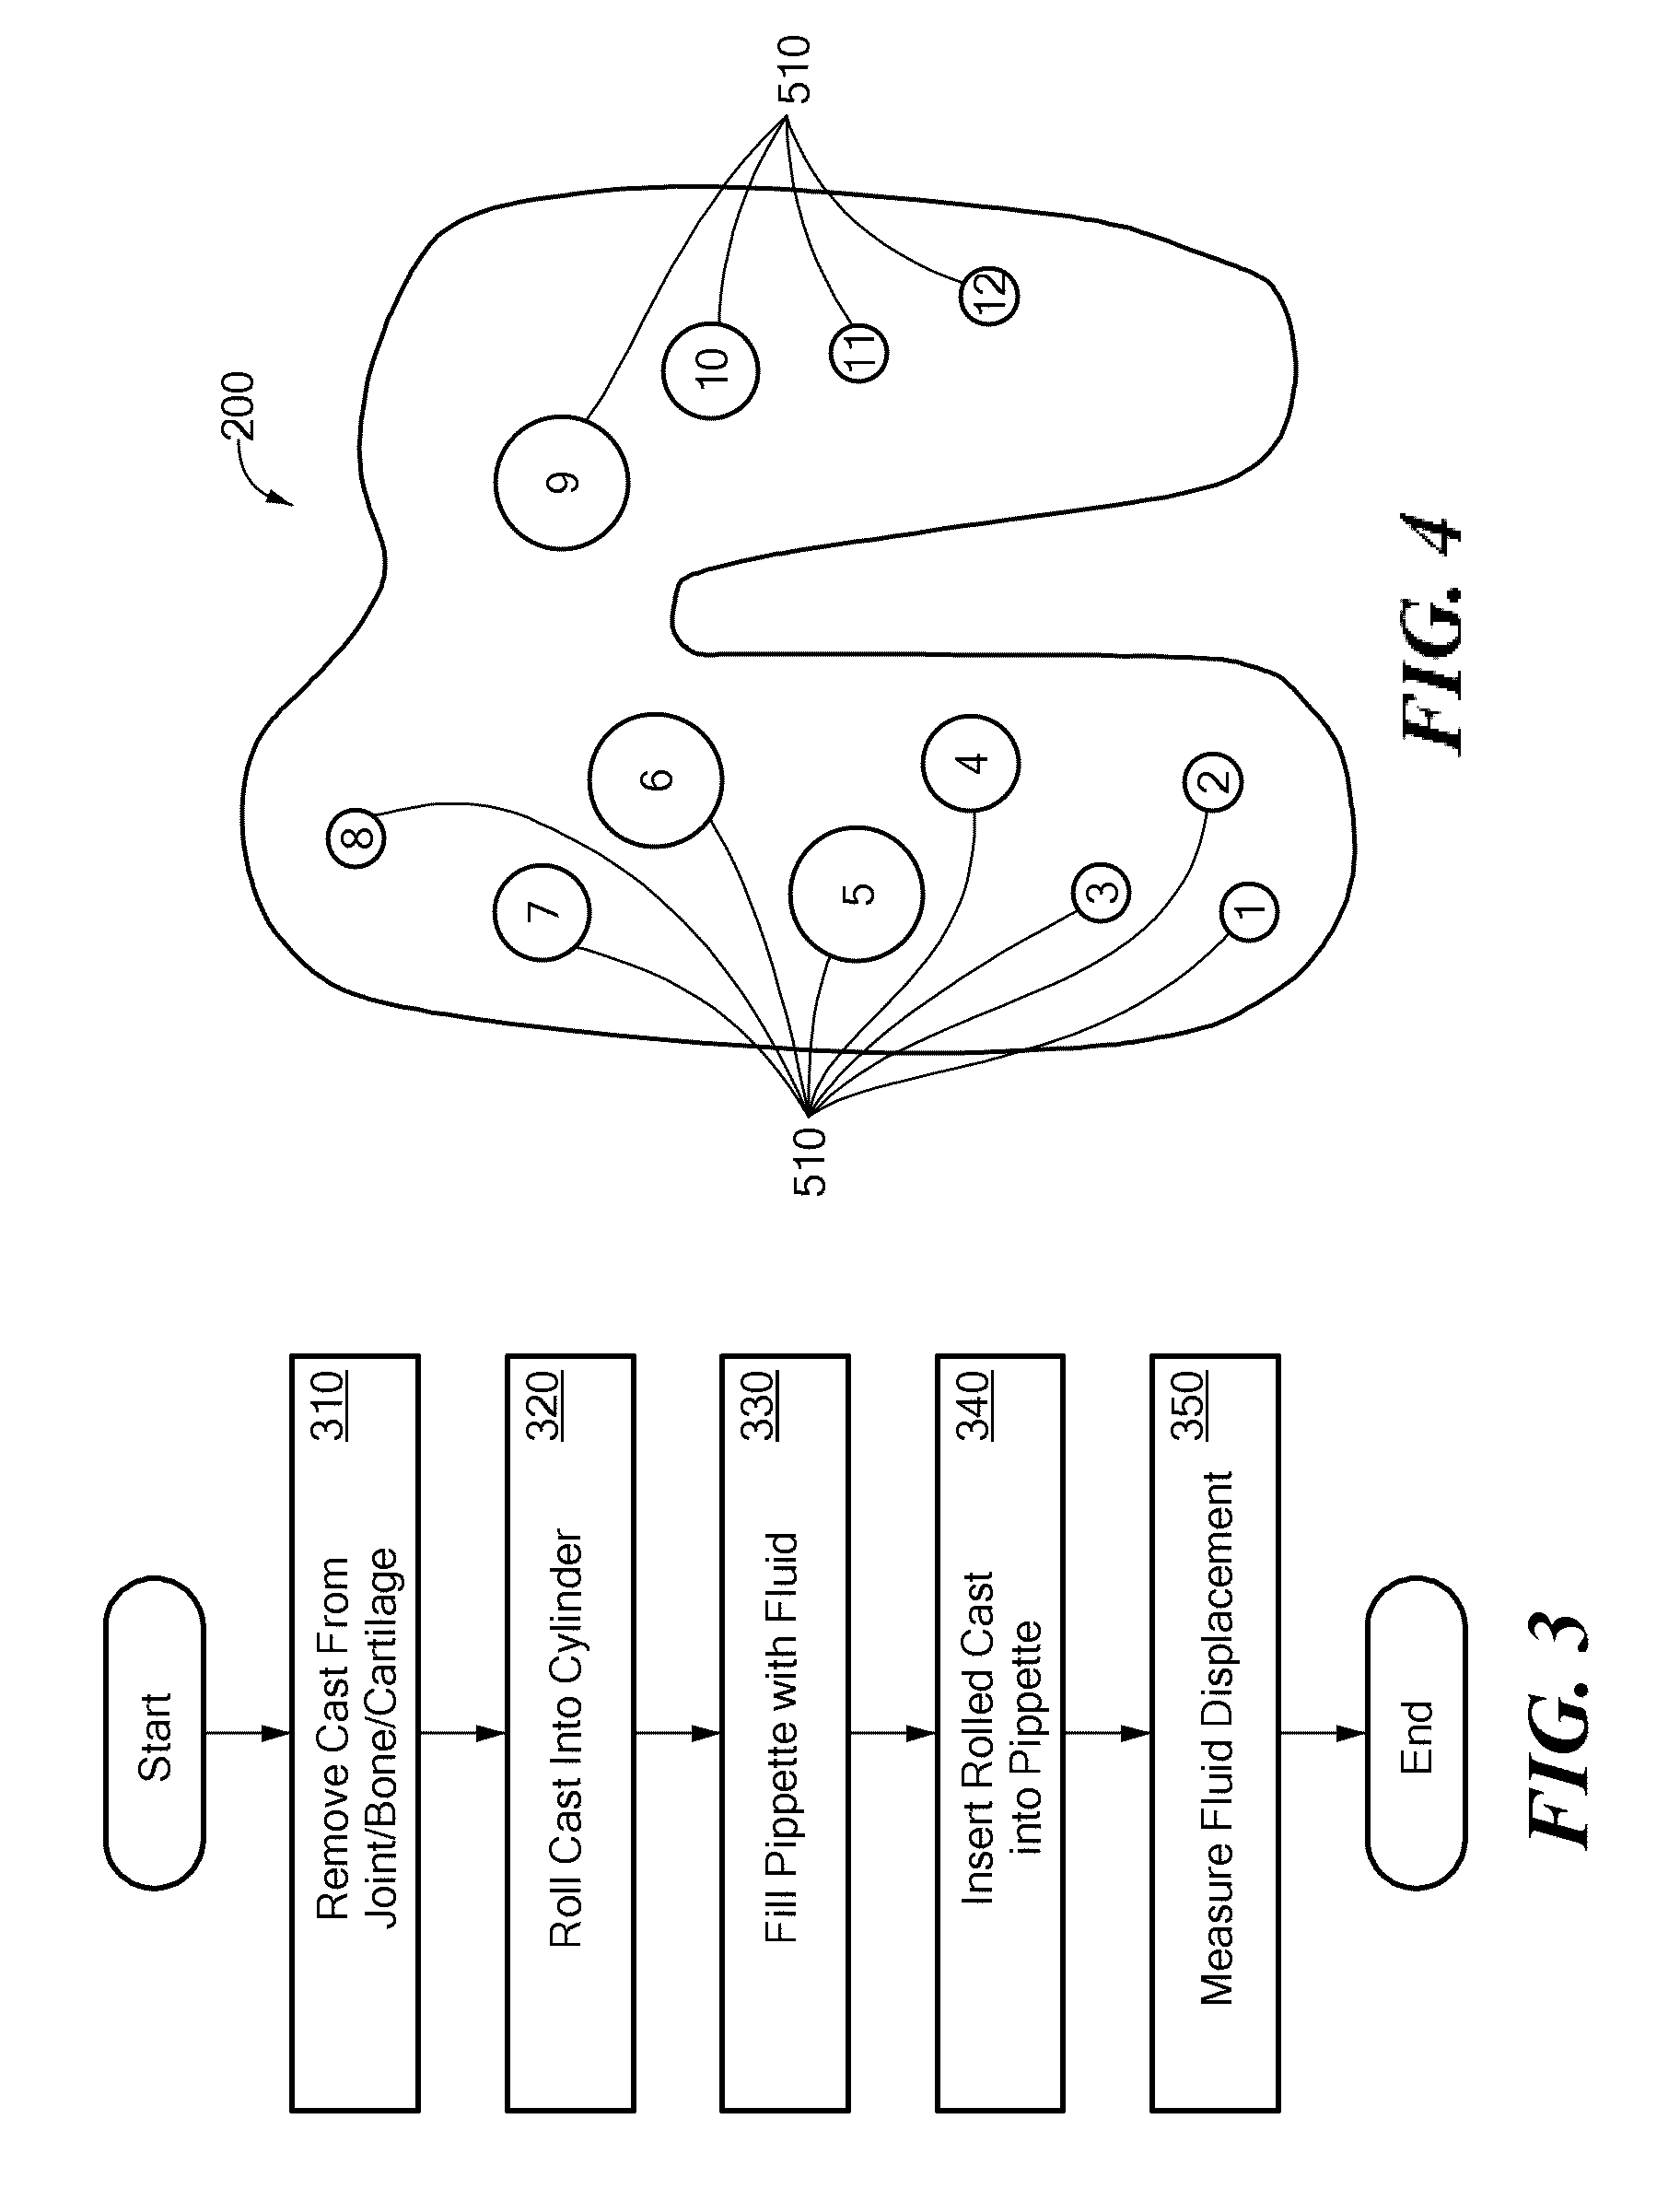 Methods and devices for quantitative analysis of bone and cartilage